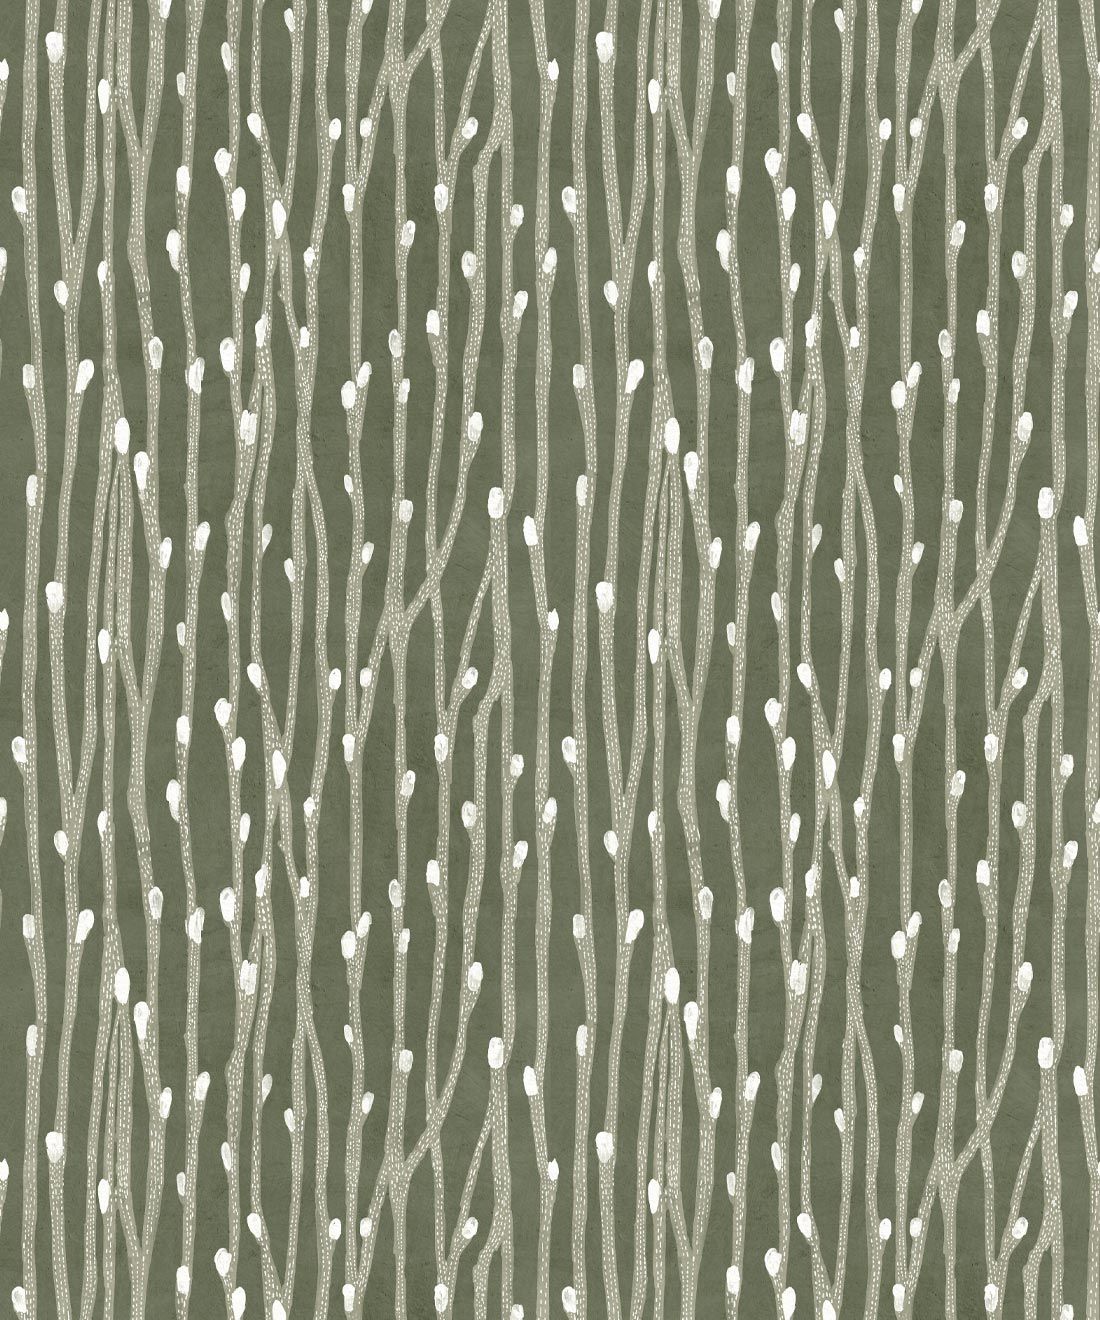 Pussy Willow Wallpaper • Floral Wallpaper • Evergreen• Swatch